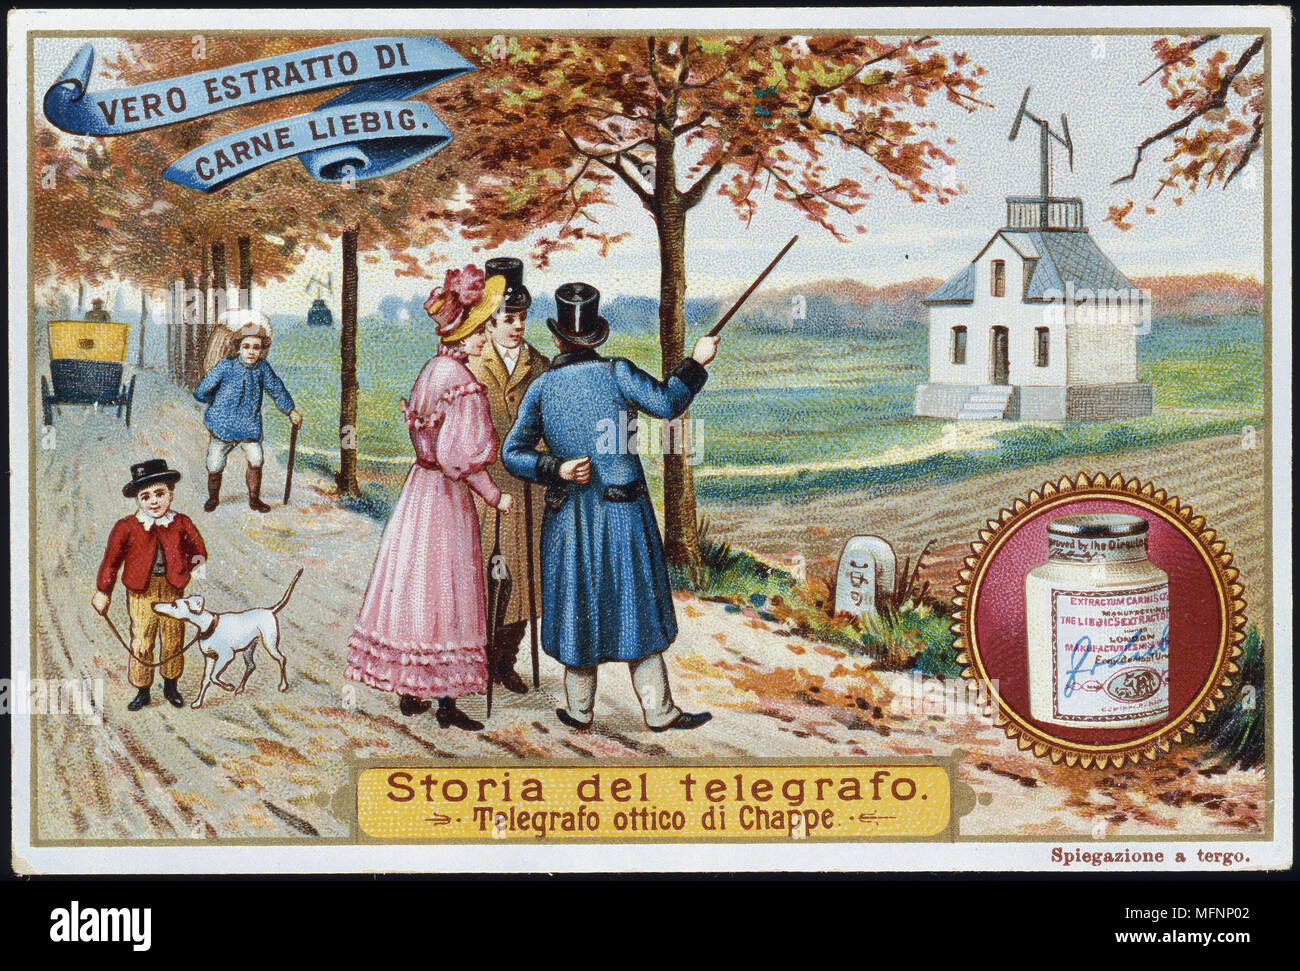 Aerial Telegraph (Semaphore). Artist's impression of Claude Chappe's (1763-1895), French engineer and inventor, telegraph system in use. Widely used, particularly in France and her colonies, until about 1850.  Liebig trade card issued c1900. Chromolithograph Stock Photo